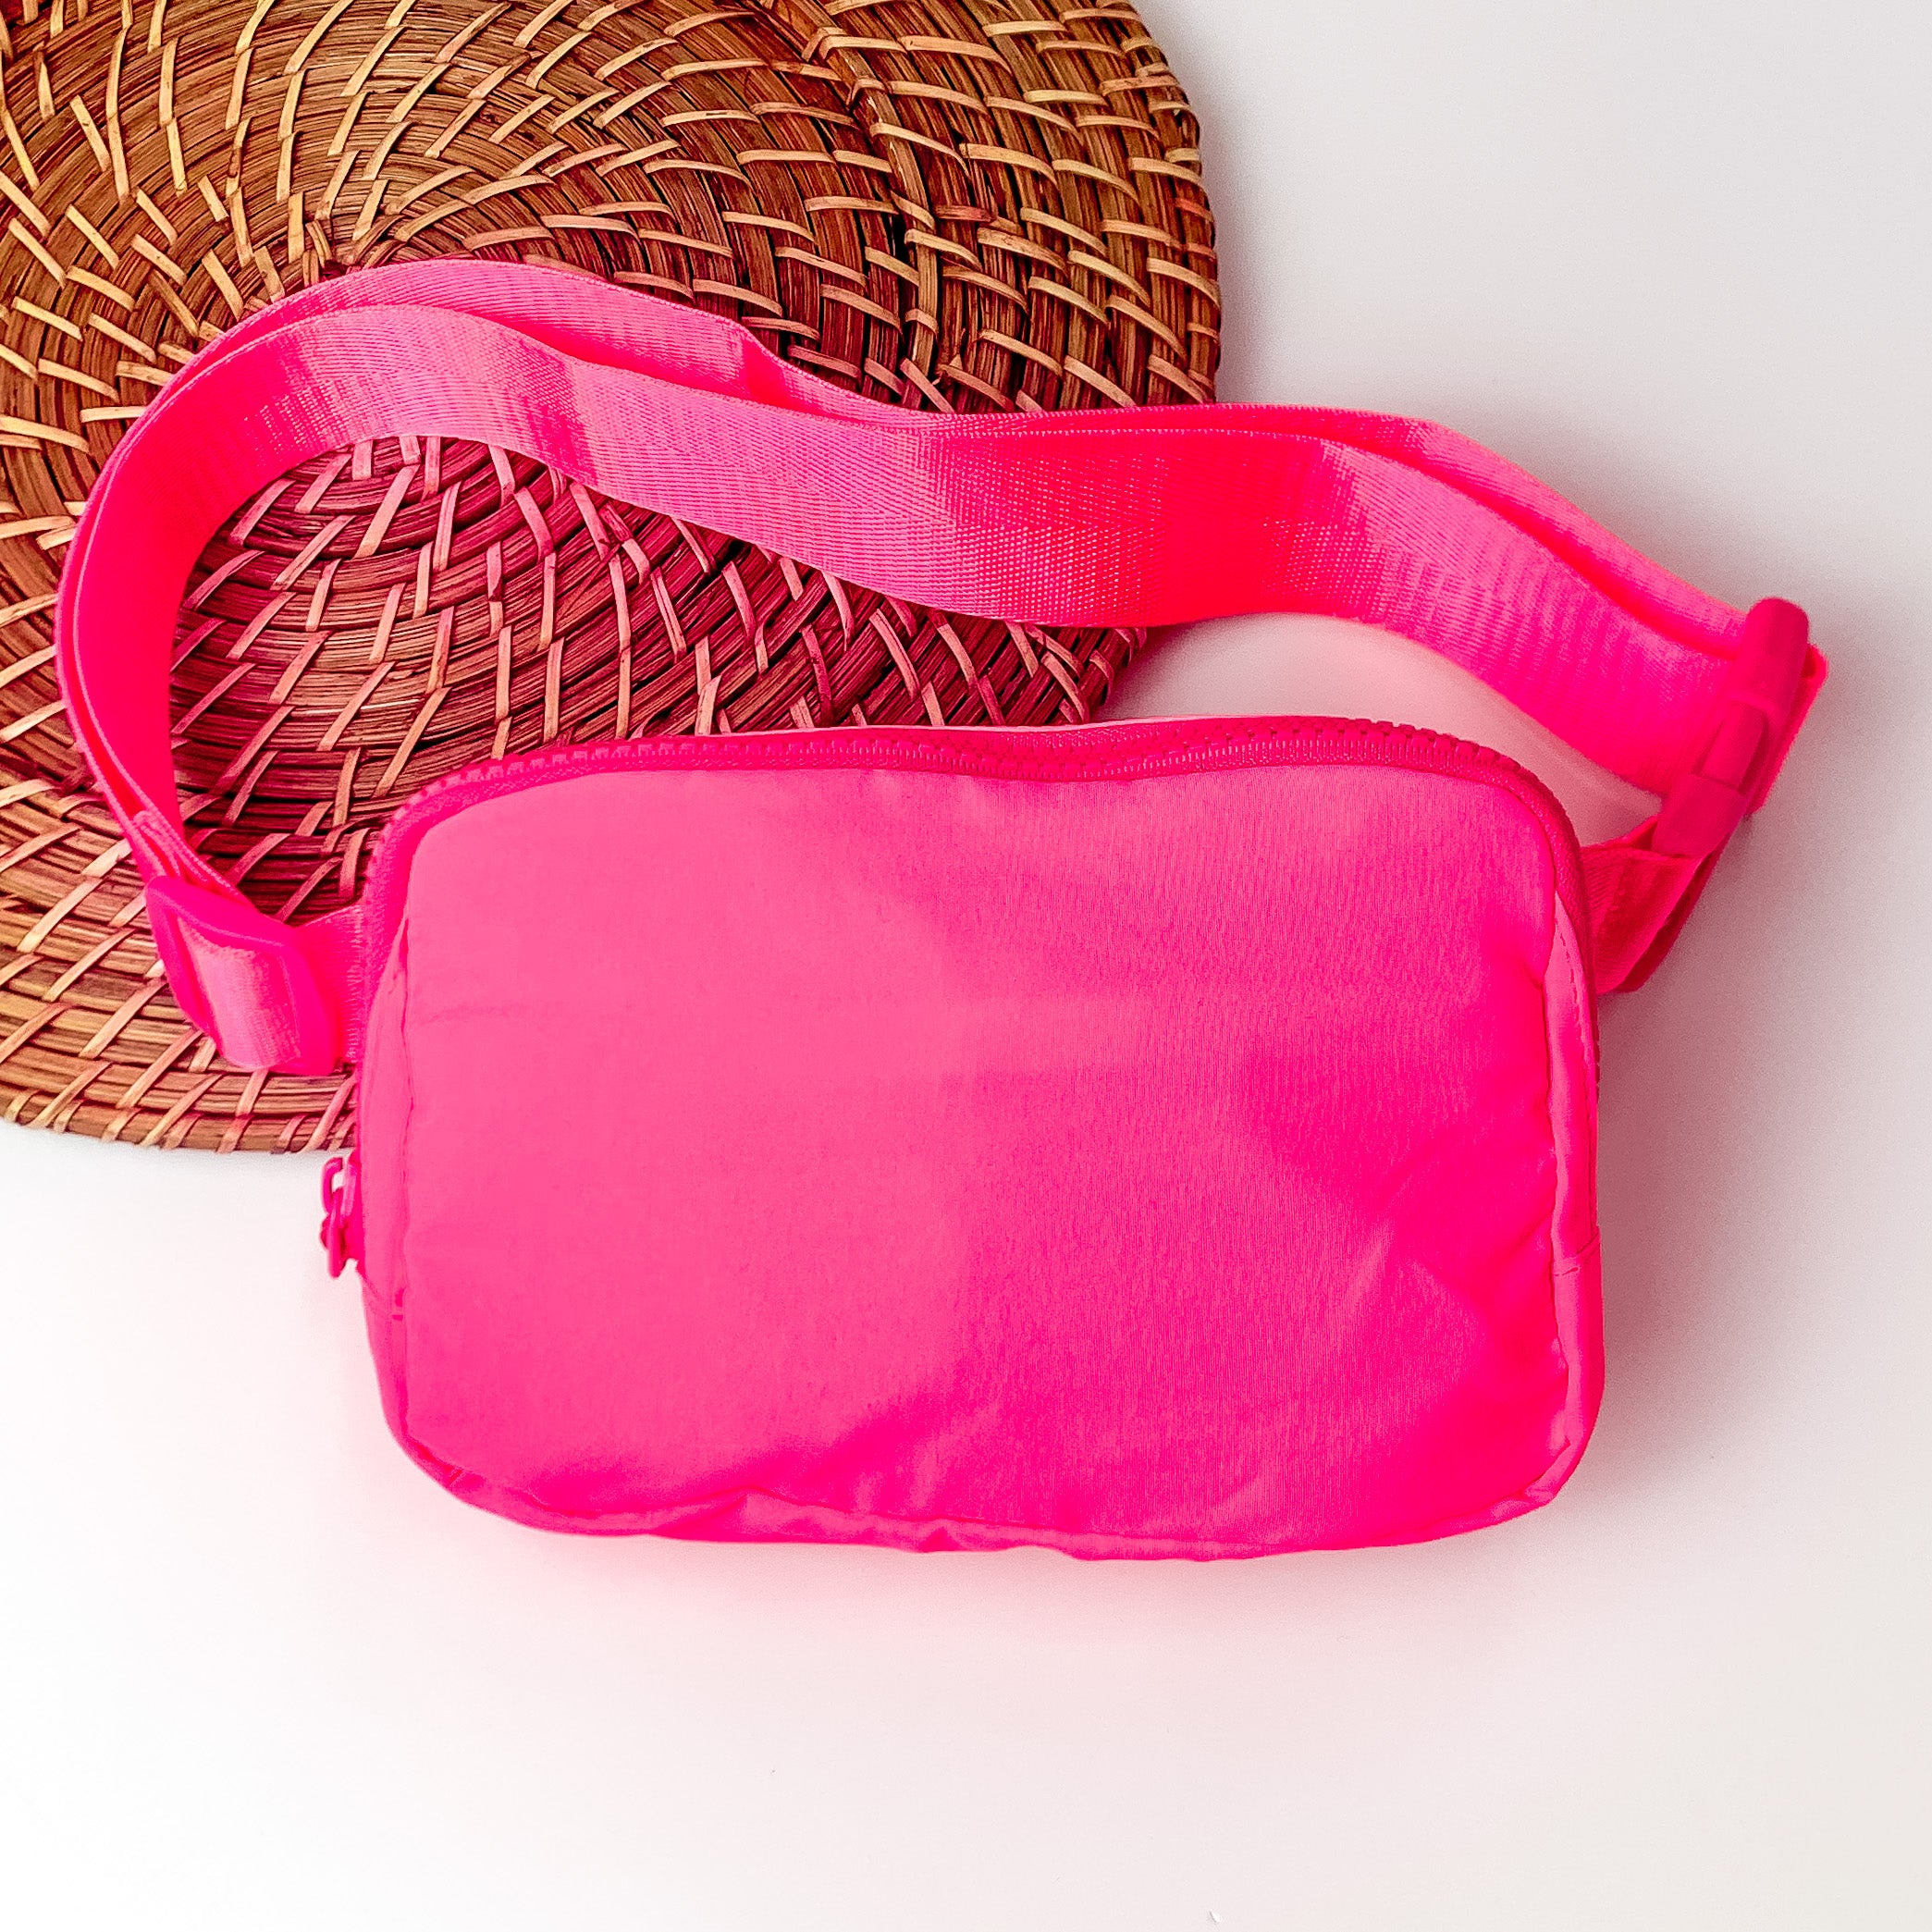 Pictured is a rectangle fanny pack with a top zipper with tassel in pink. This bag also includes a pink strap and pink accents. This bag is pictured on a white and brown patterned background.